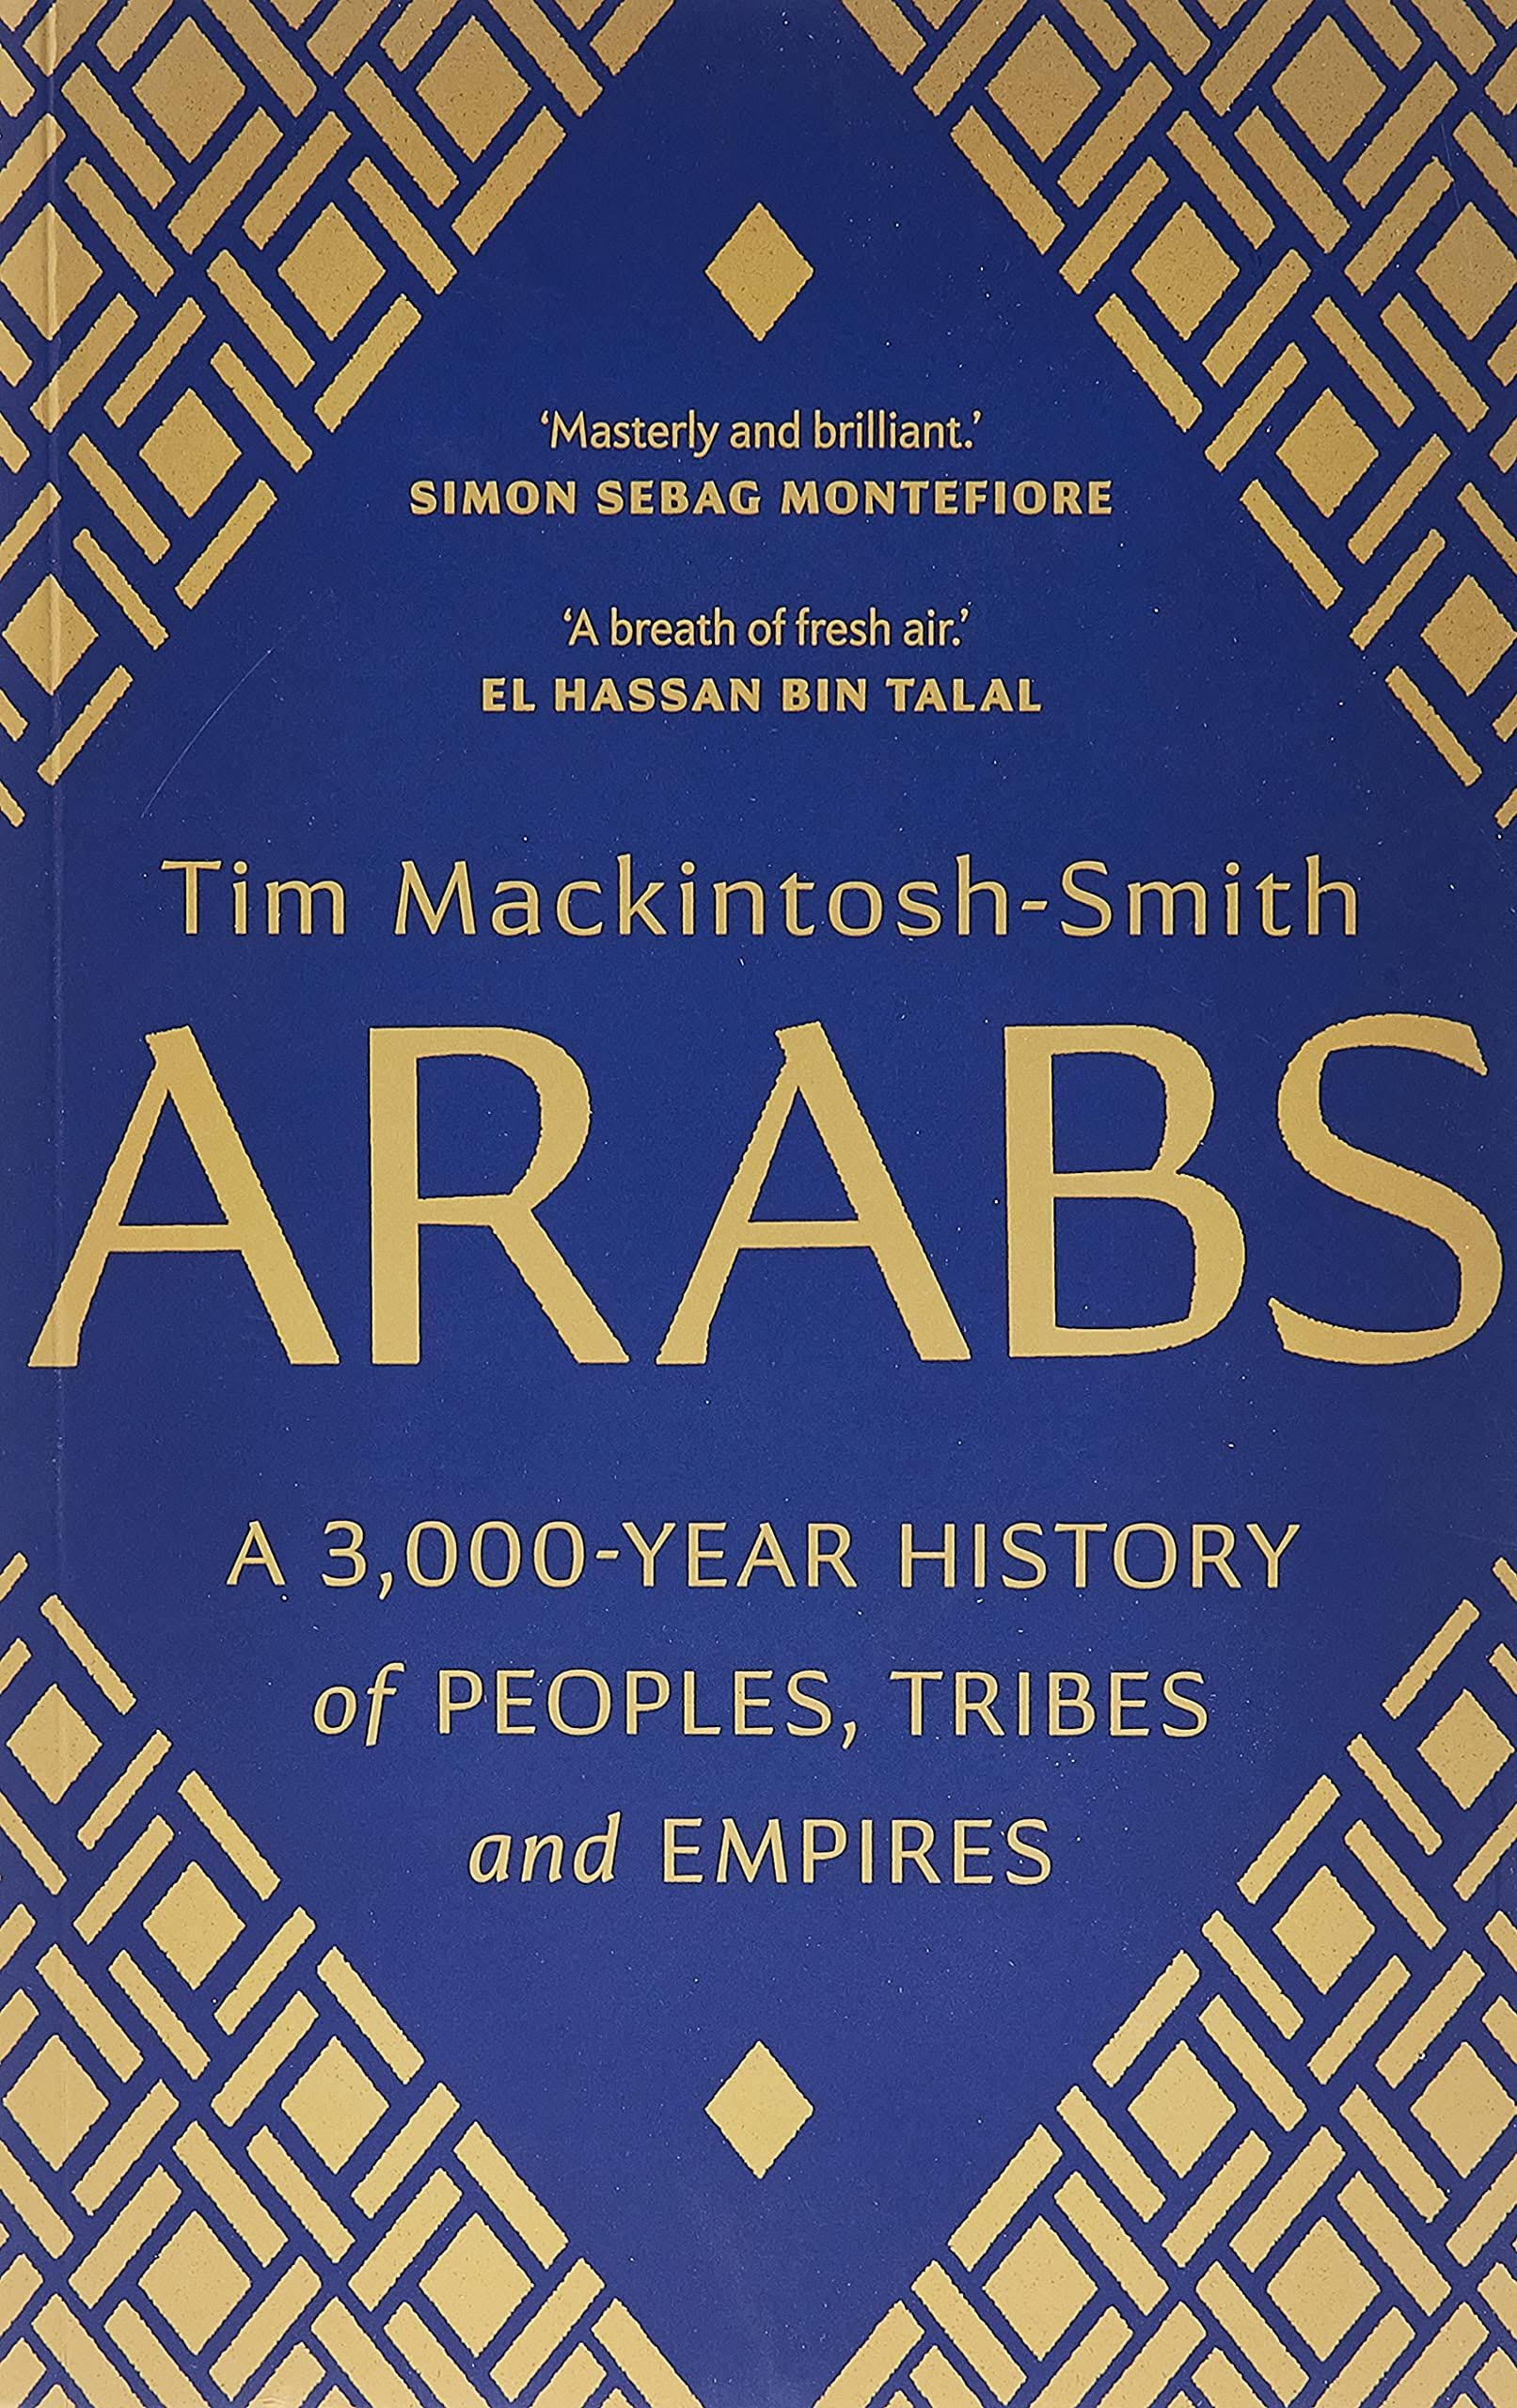 Arabs: A 3,000-Year History of Peoples, Tribes and Empires [Book]